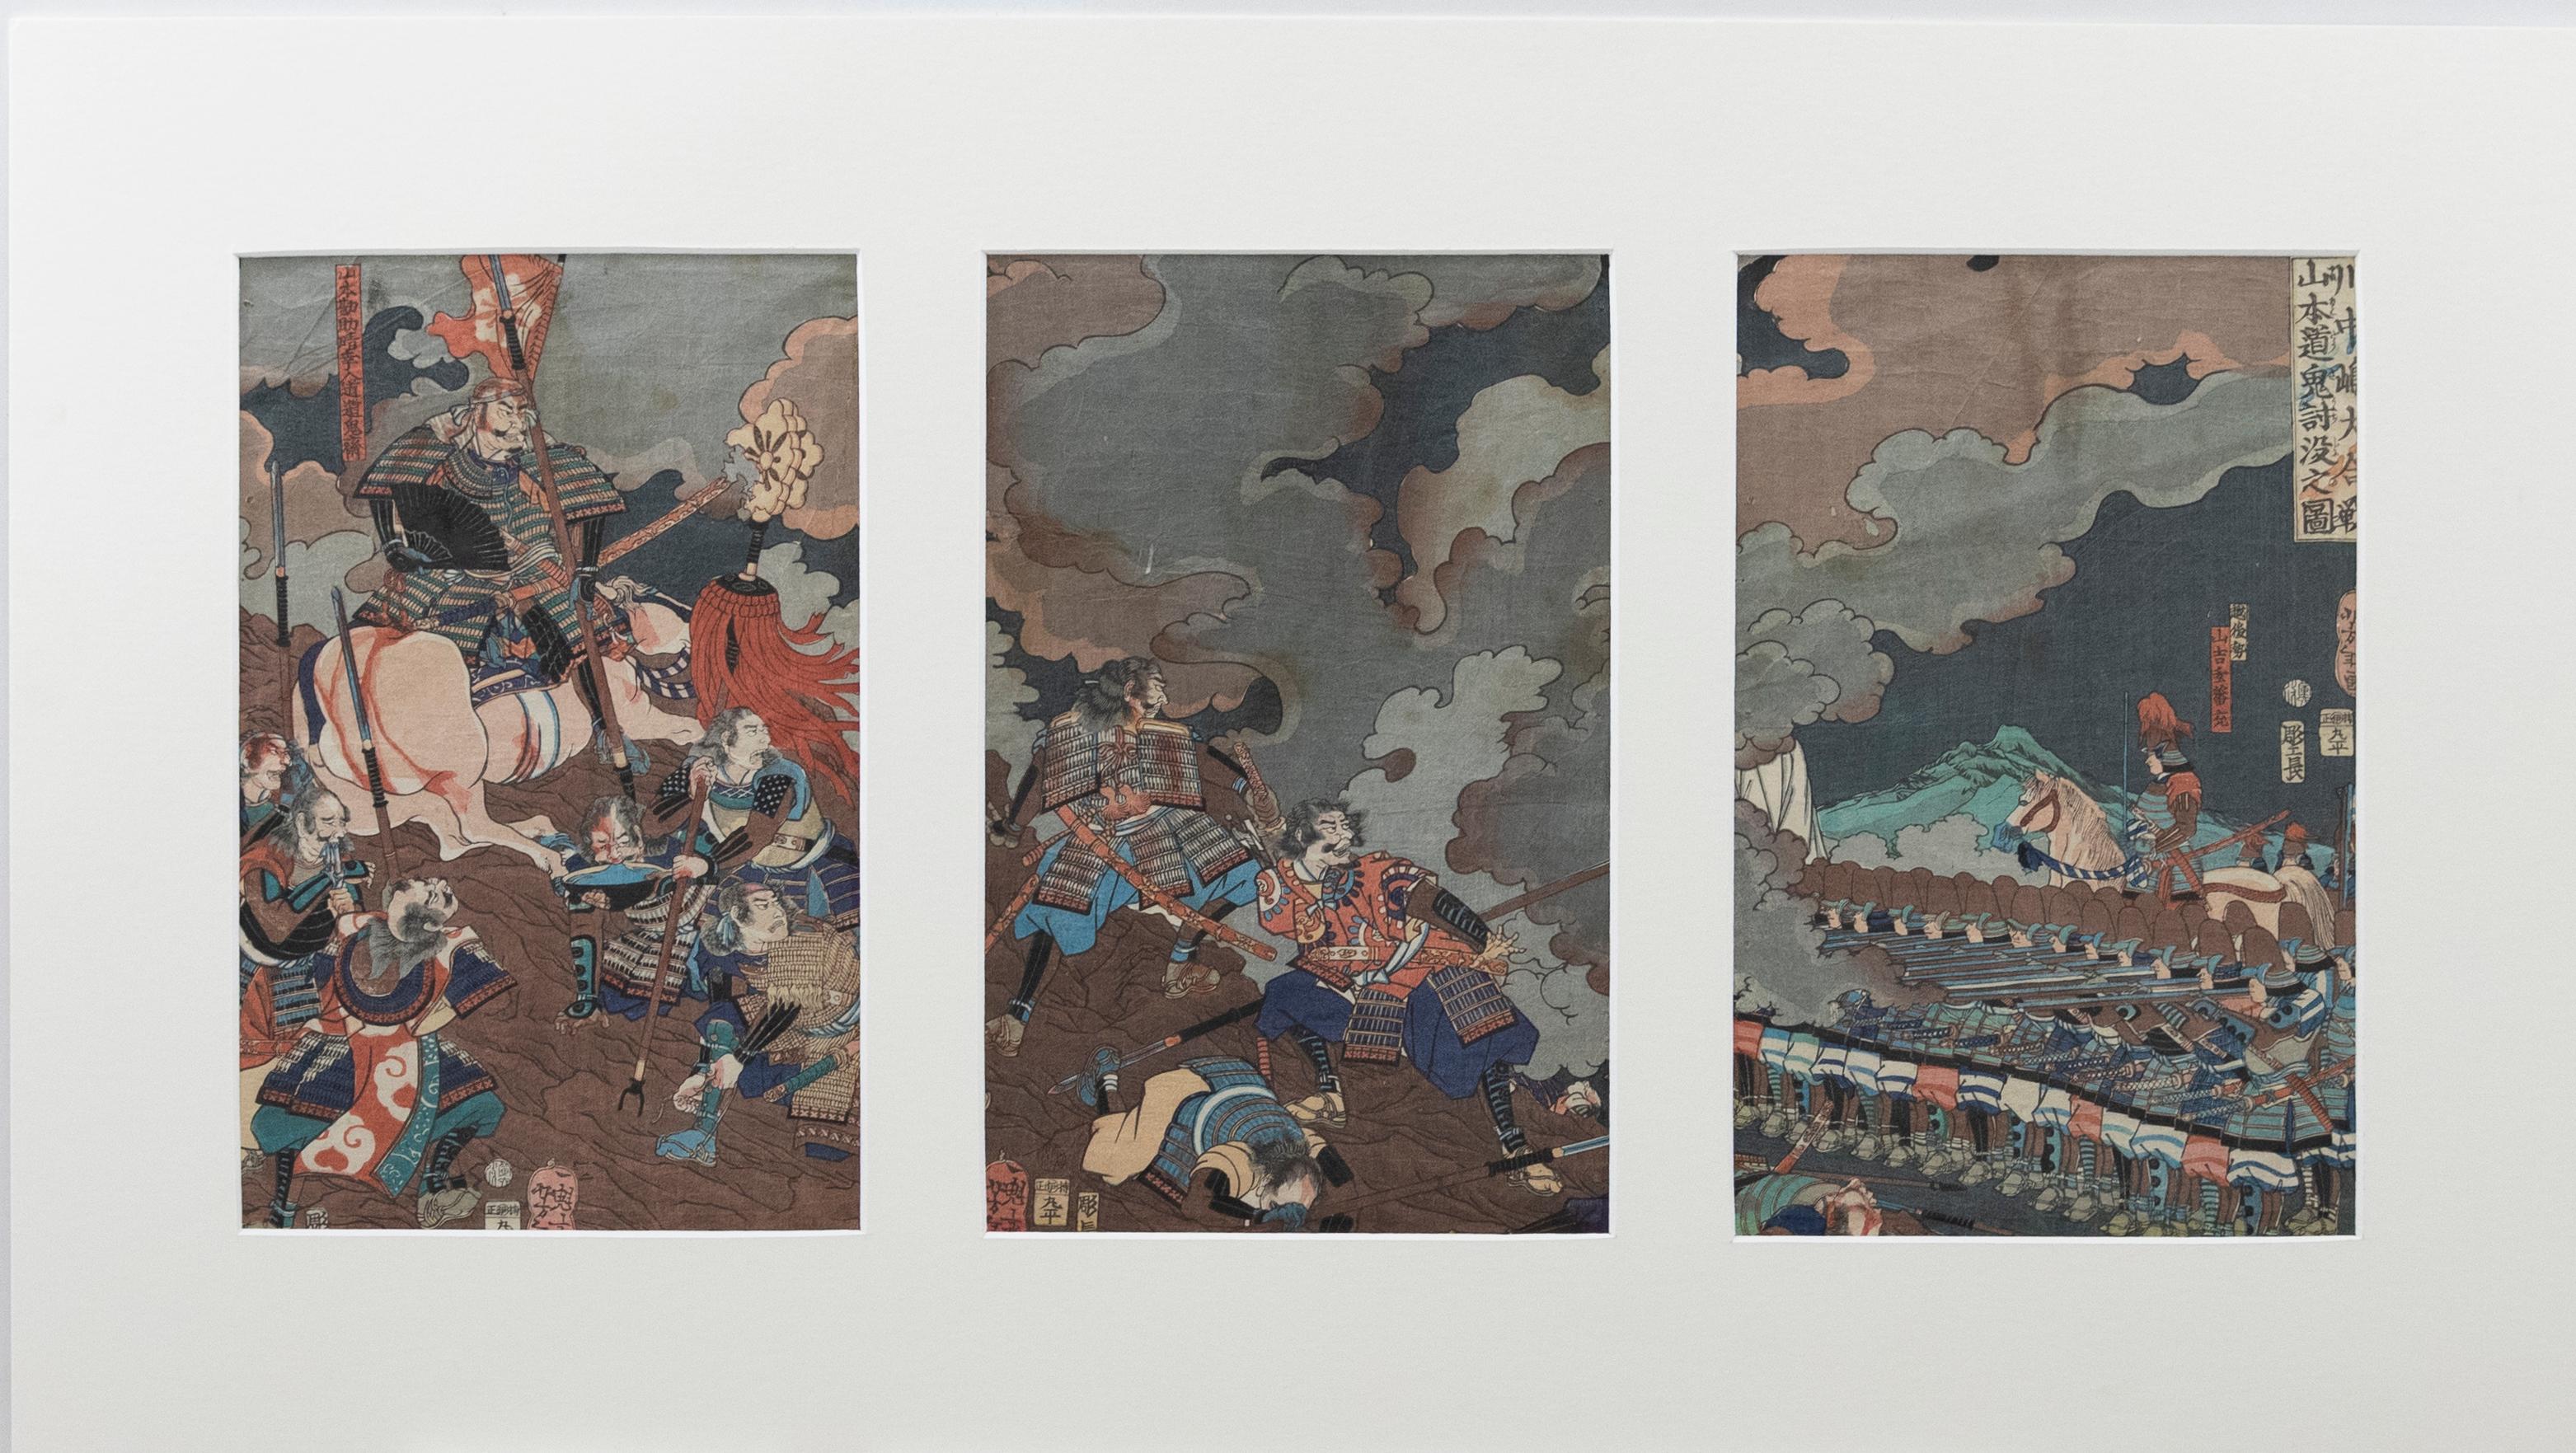 An extraordinary ukiyo-e triptych by one of the greatest ukiyo-e artists of the 19thC, Tsukioka Yoshitoshi (1839-1892). The triptych shows a dramatic scene from the epic, bloody fourth battle of the Kawanakajima war. Of all of the triptychs